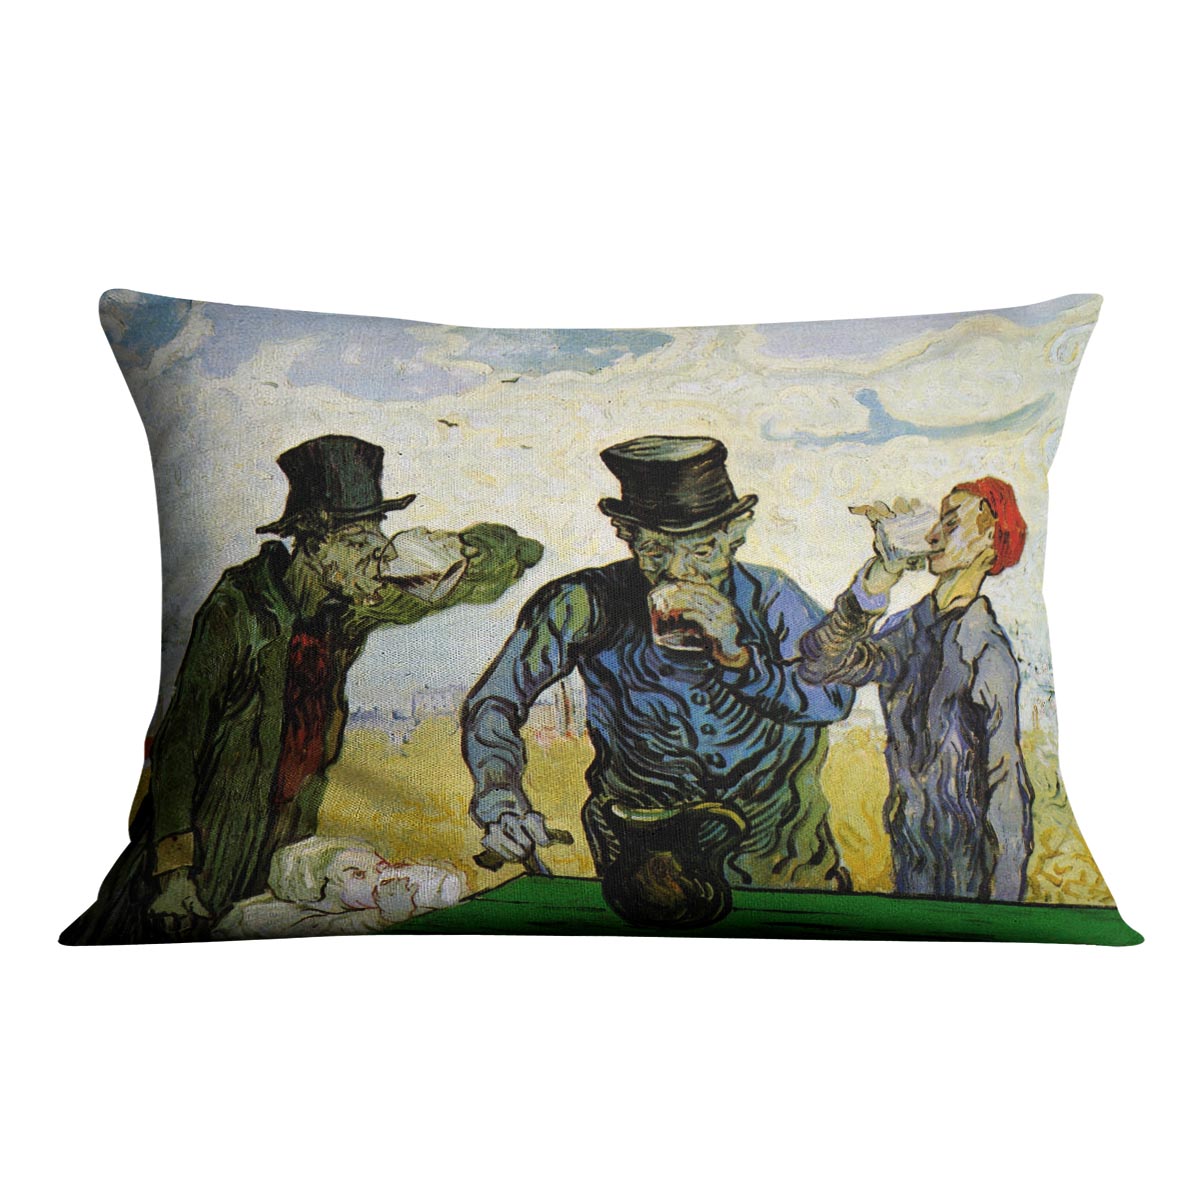 The Drinkers by Van Gogh Cushion